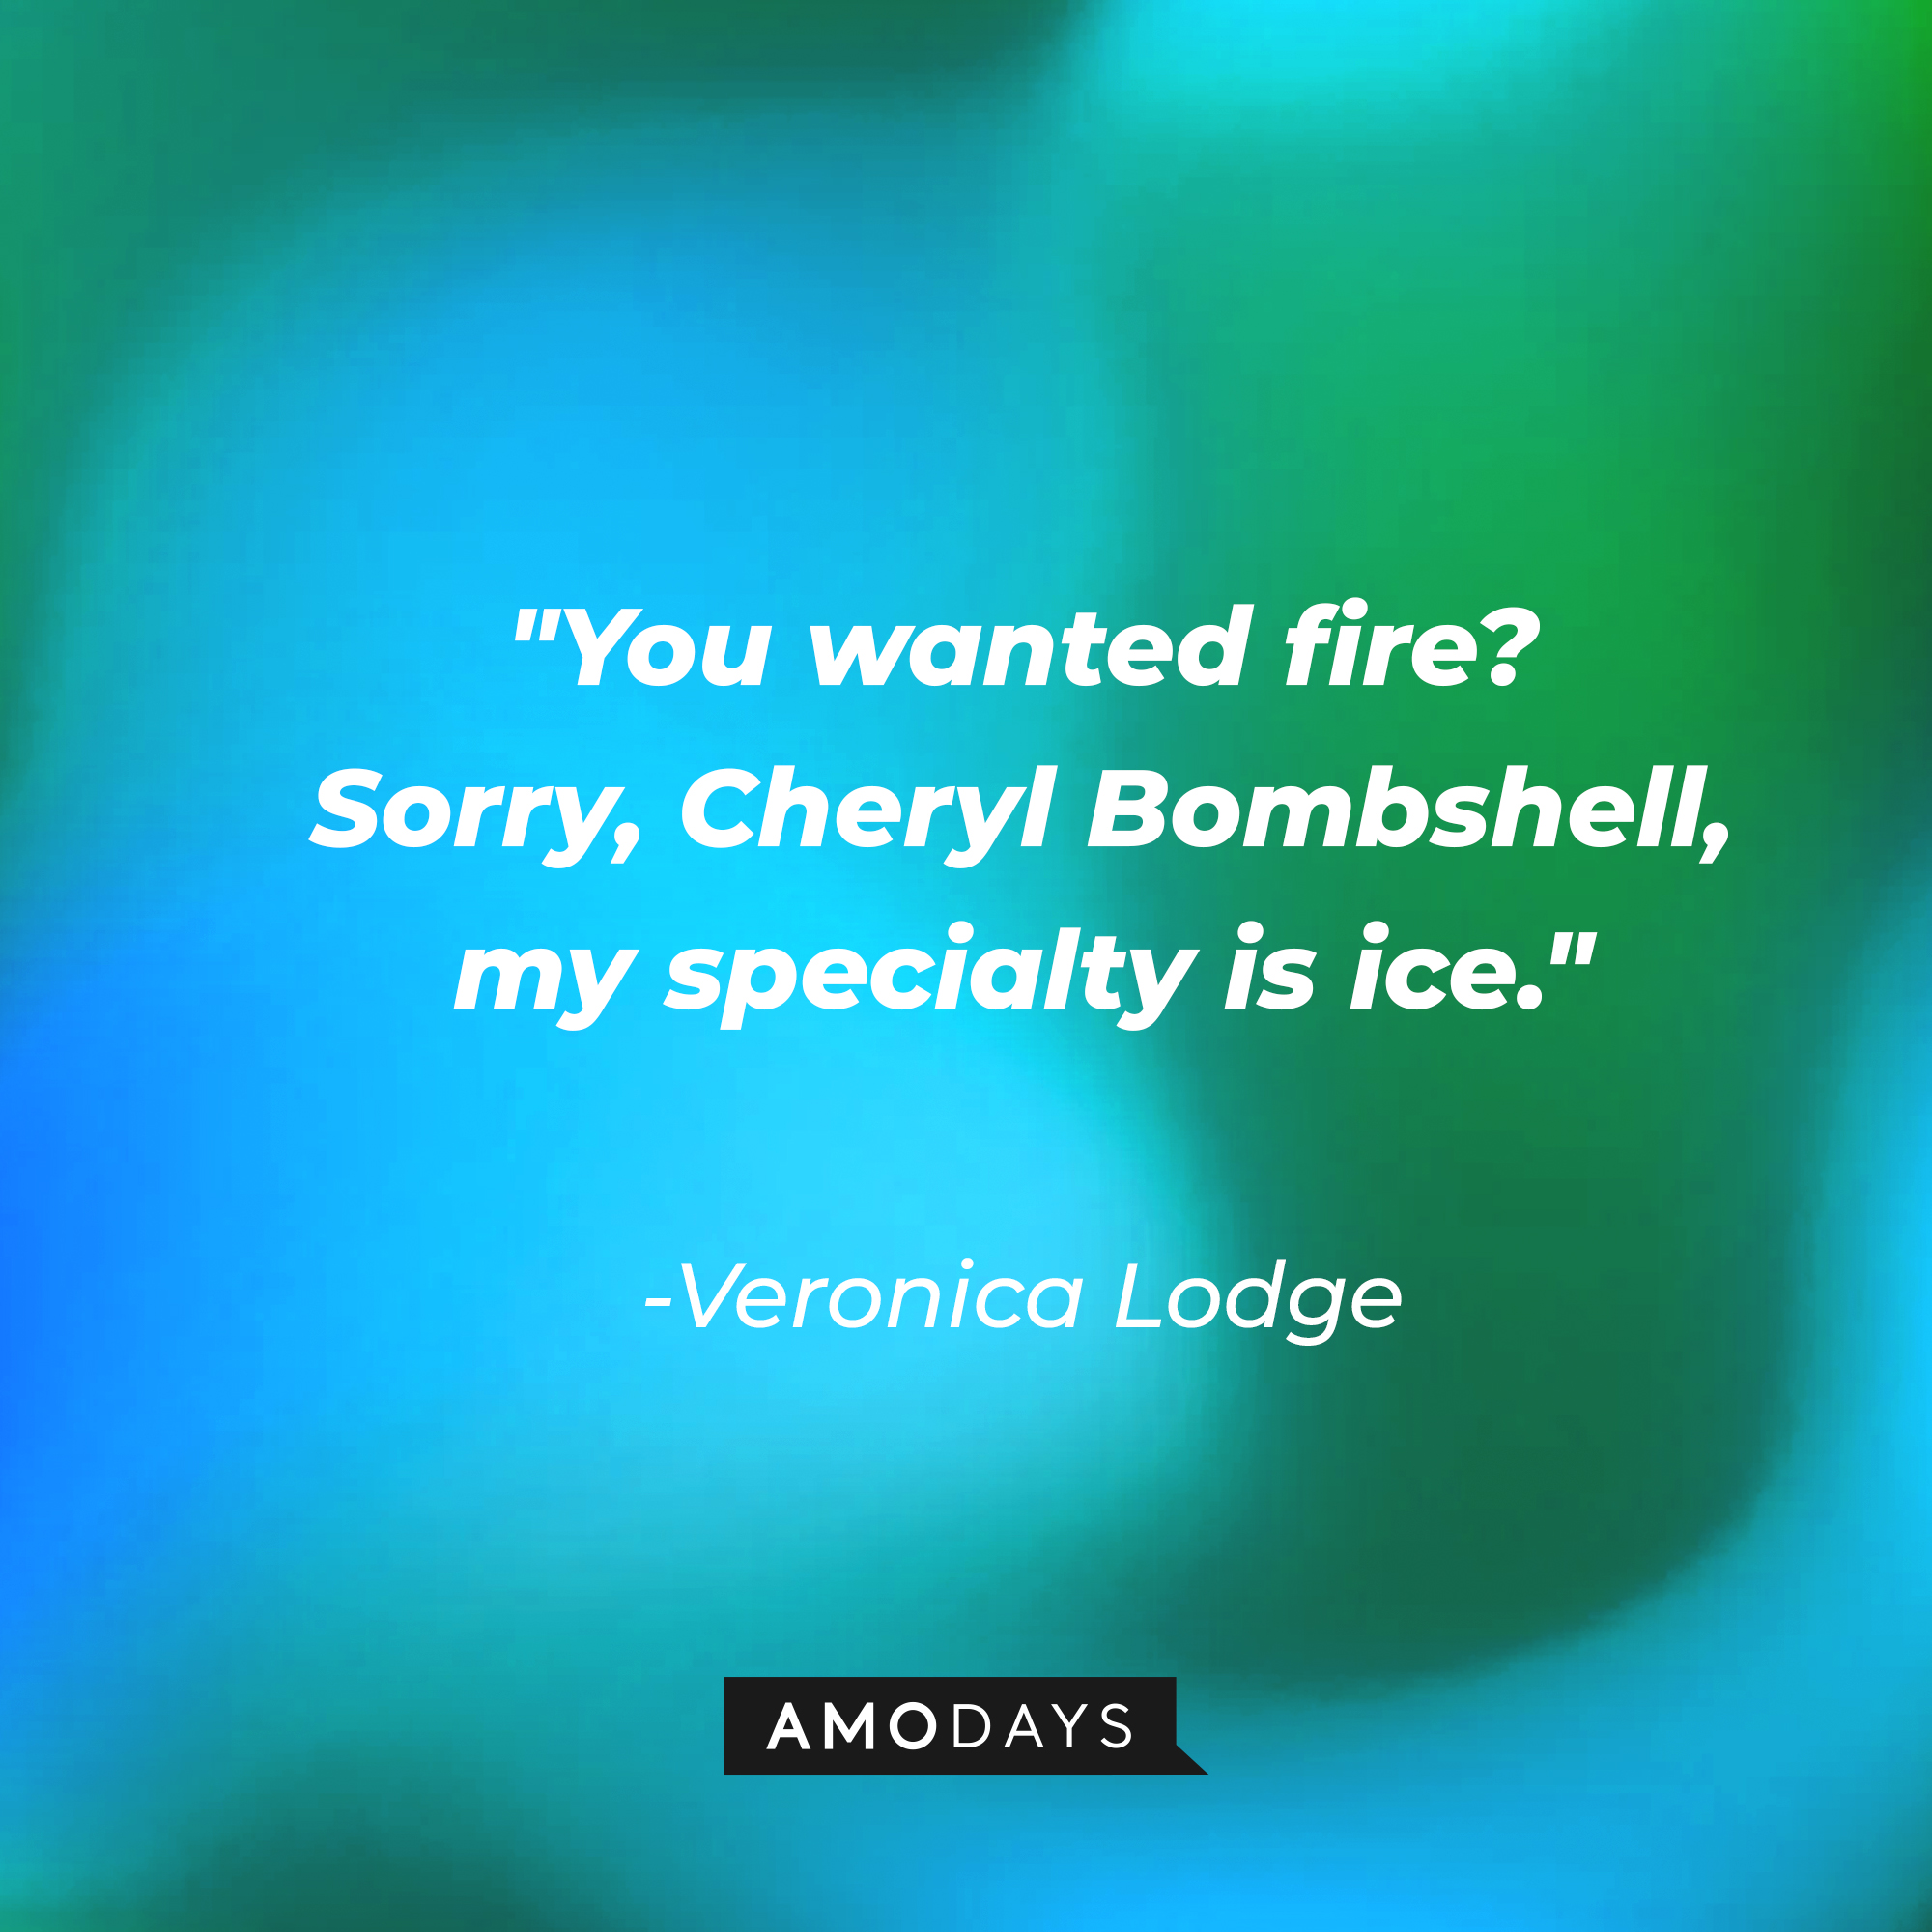 Veronica Lodge's quote: "You wanted fire? Sorry, Cheryl Bombshell, my specialty is ice." | Source: AmoDays